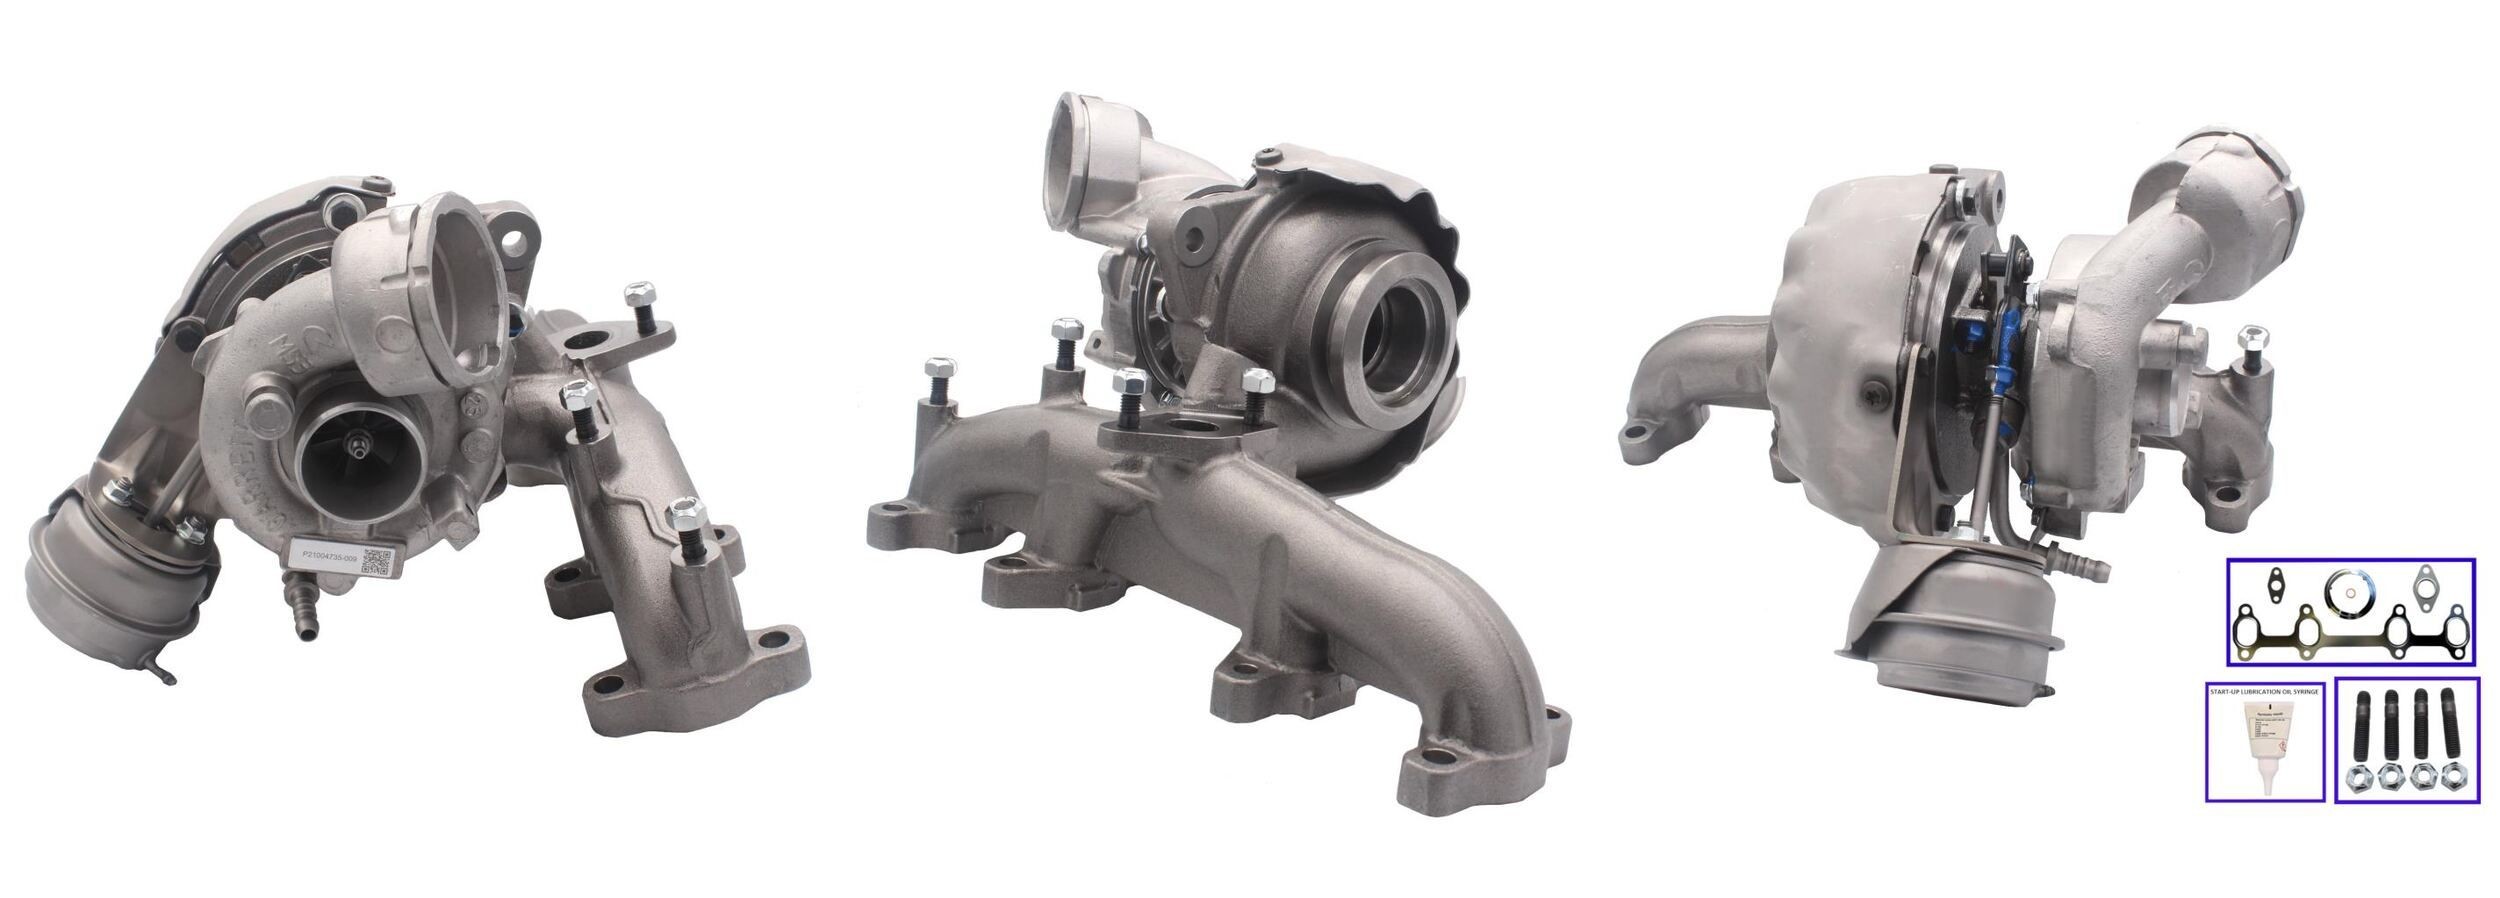 LUCAS LTRPA7652612 Turbocharger Exhaust Turbocharger, Pneumatically controlled actuator, with gaskets/seals